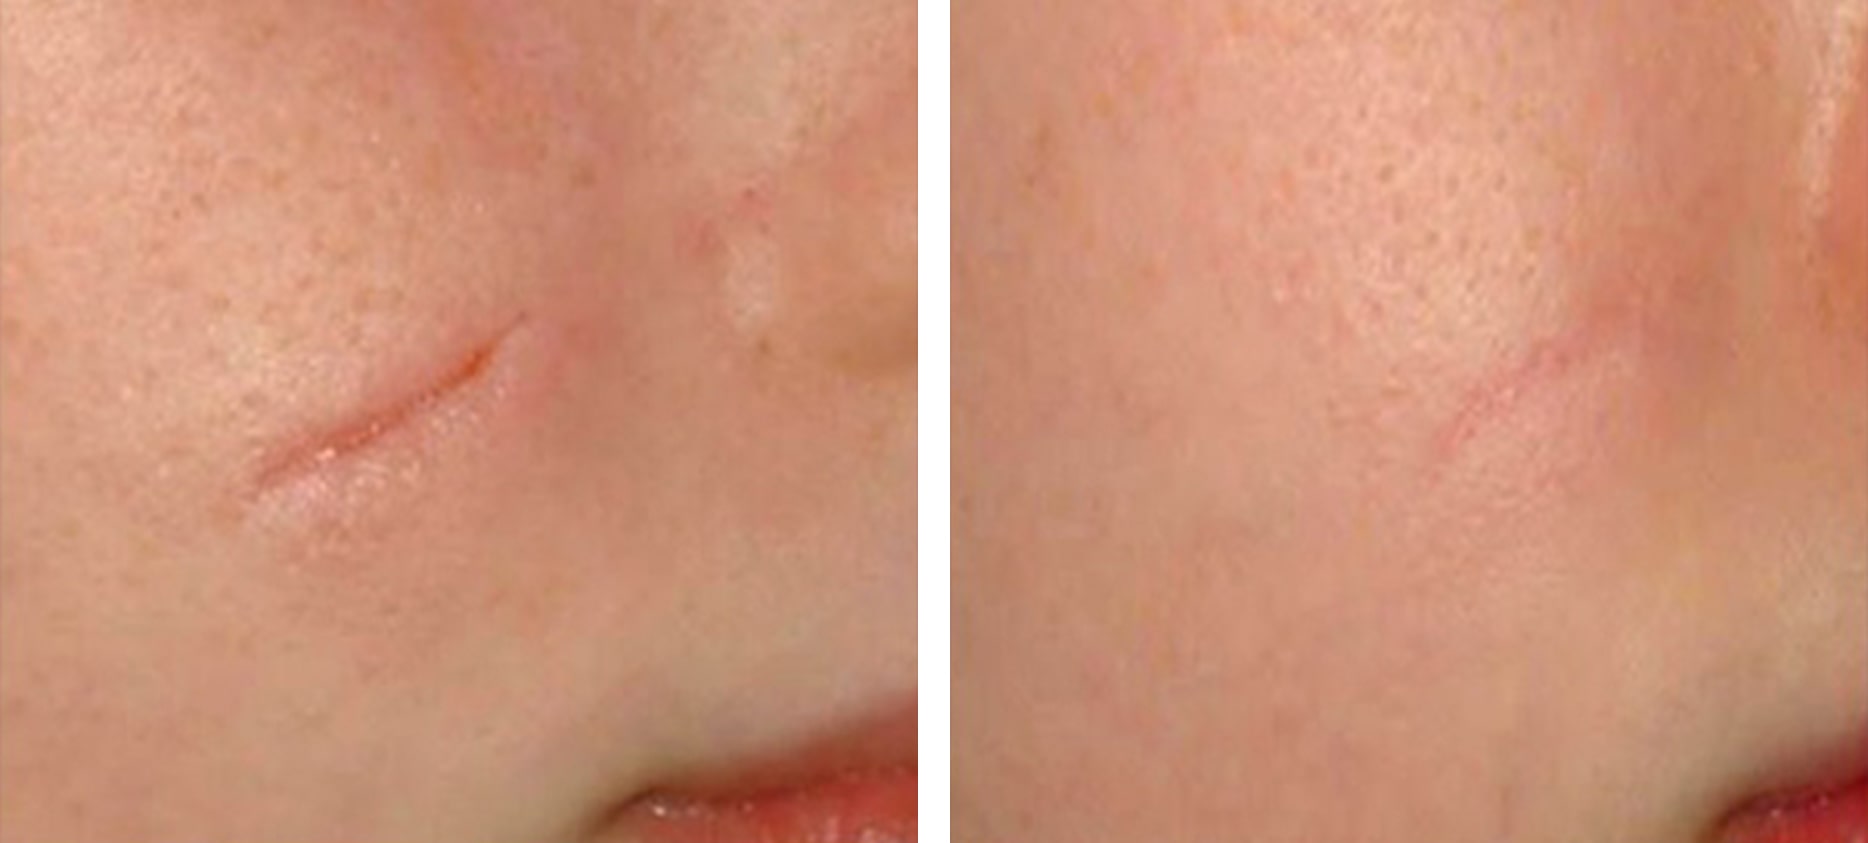 Scars before and after treatment at Kingsway Dermatology